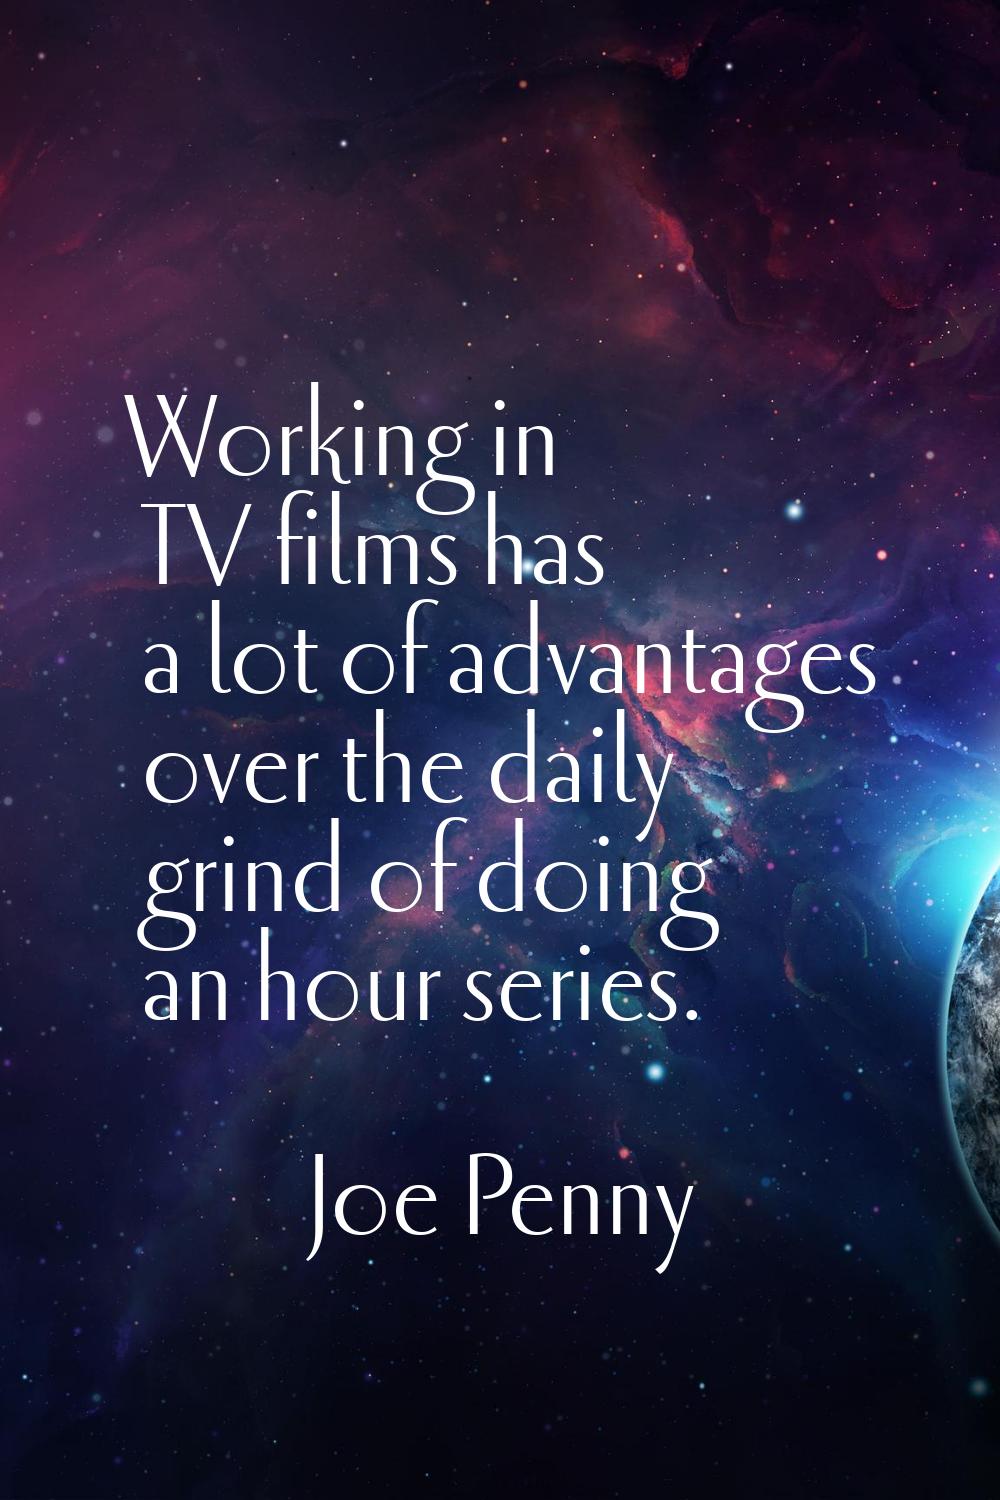 Working in TV films has a lot of advantages over the daily grind of doing an hour series.